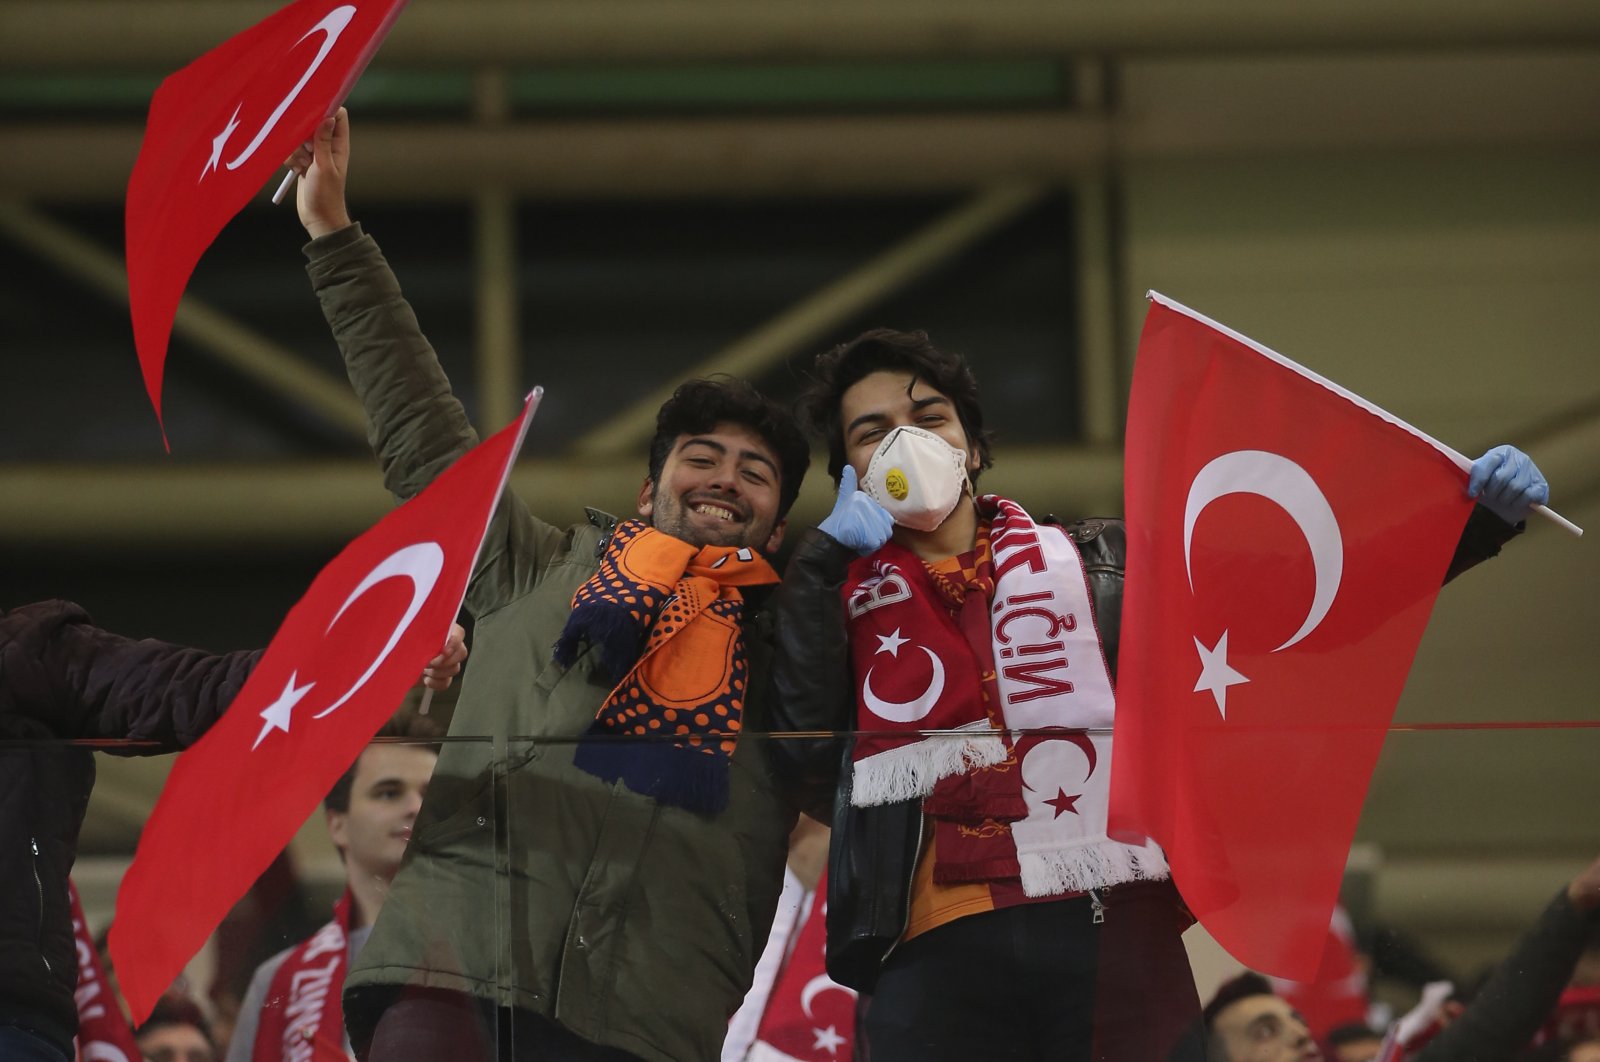 Spectators, some wearing masks because of the coronavirus outbreak, wave Turkish flags prior to the first leg of a Europa League top 16 soccer match between Başakşehir and Copenhagen, in Istanbul, March 12, 2020. (AP Photo)